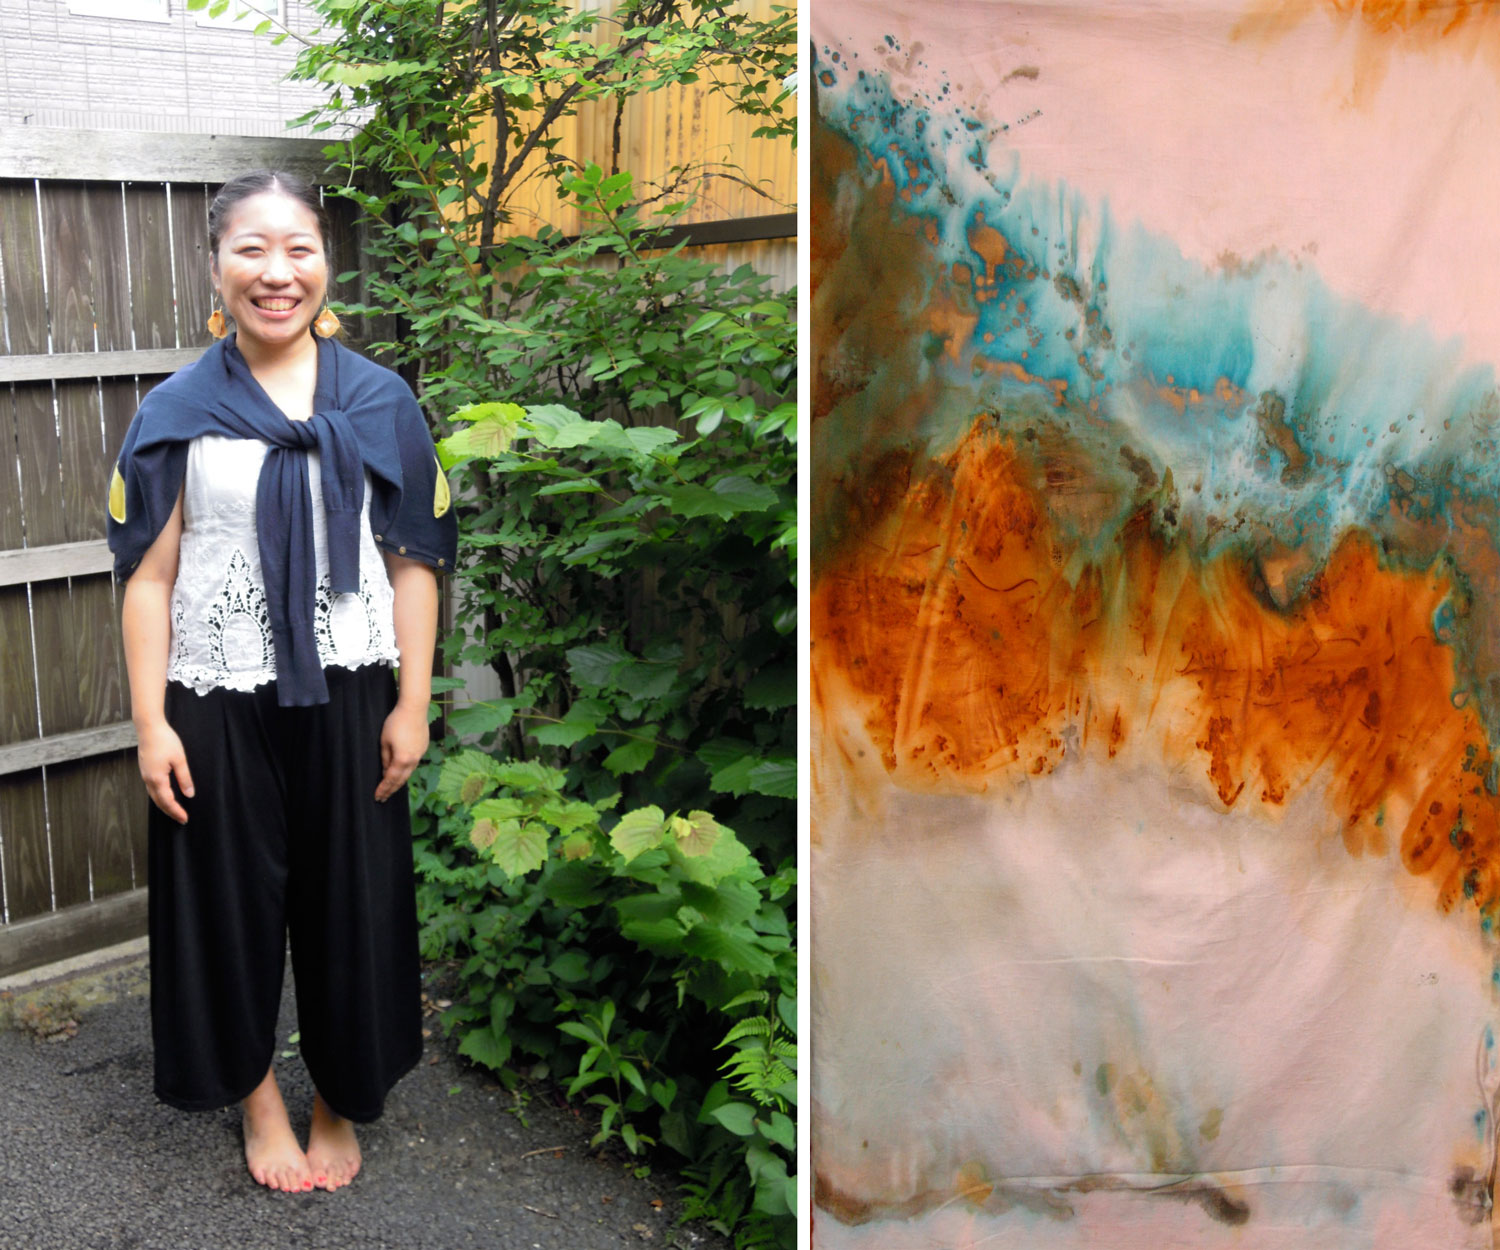 Left: Keico Murakami. After graduating Musashino University of Arts, she worked as an textile-product designer at a company. Later in 2011, she established a brand "sabi-nuno."